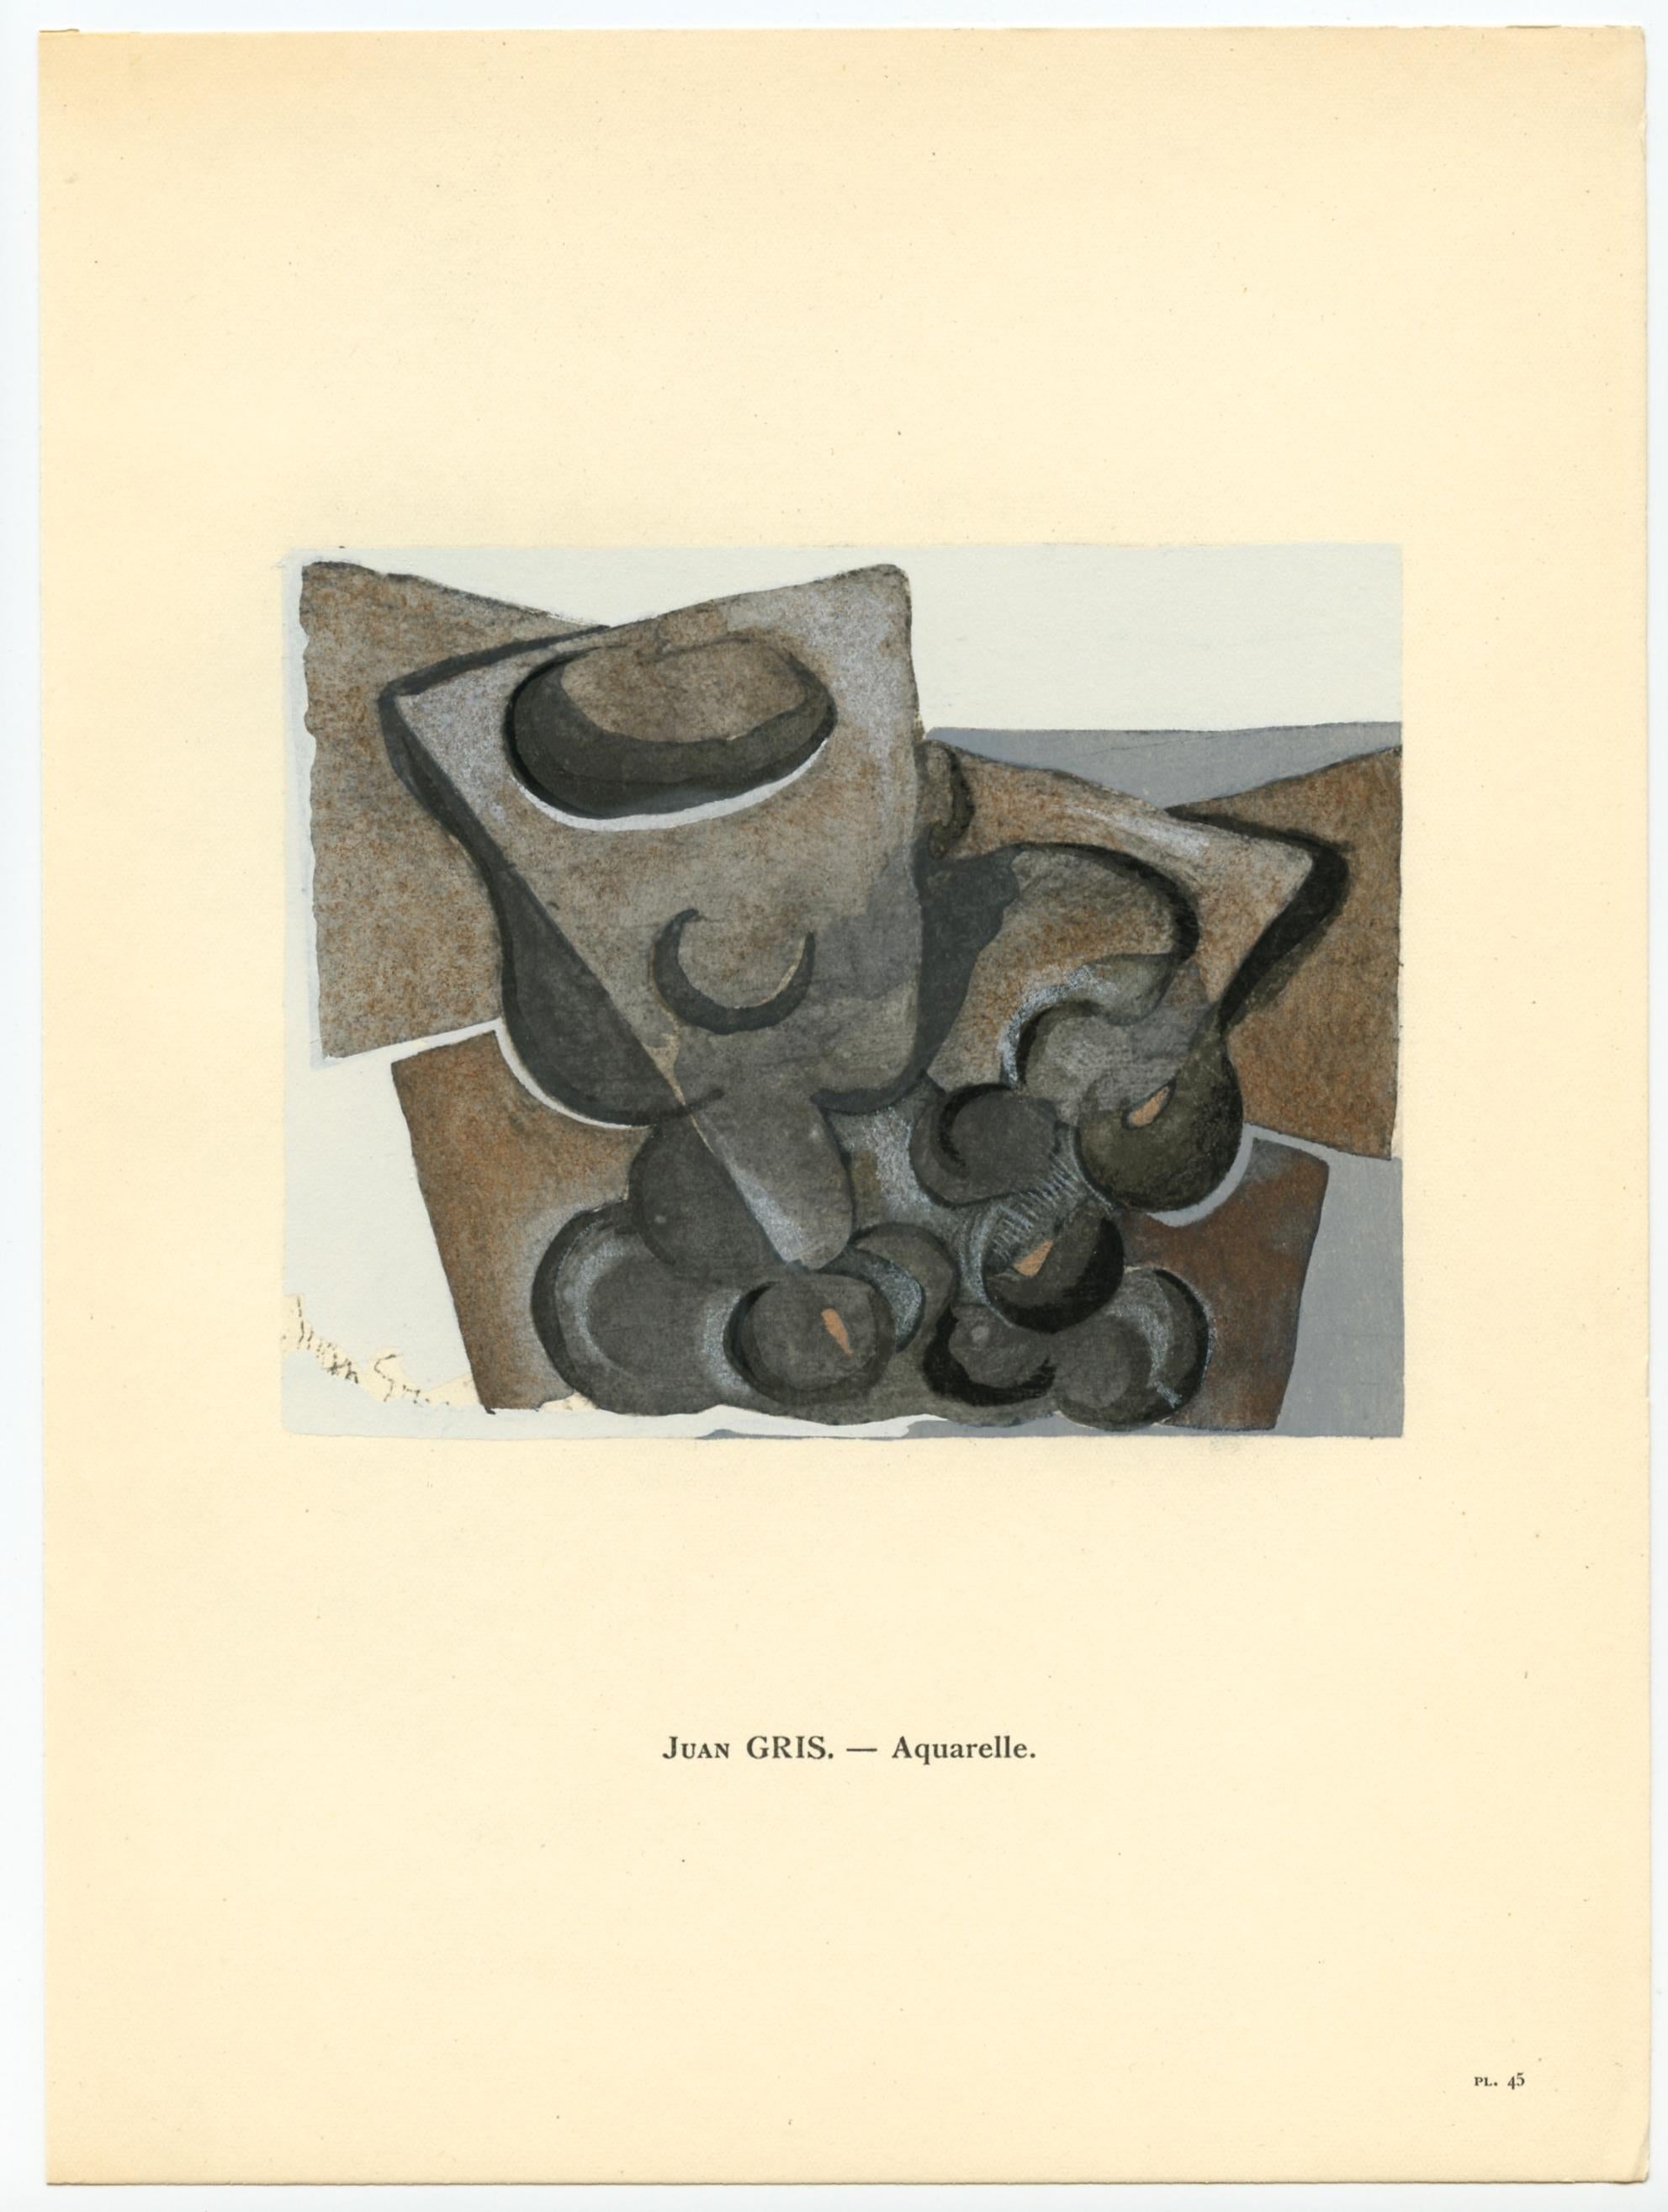 Medium: pochoir (after the watercolor). Printed in Paris in 1929 at the atelier of Daniel Jacomet for L'Art Cubiste. Image size: 4 1/2 x 5 1/2 inches (112 x 140 mm). A text inscription beneath the image identifies the artist. Signed in the plate